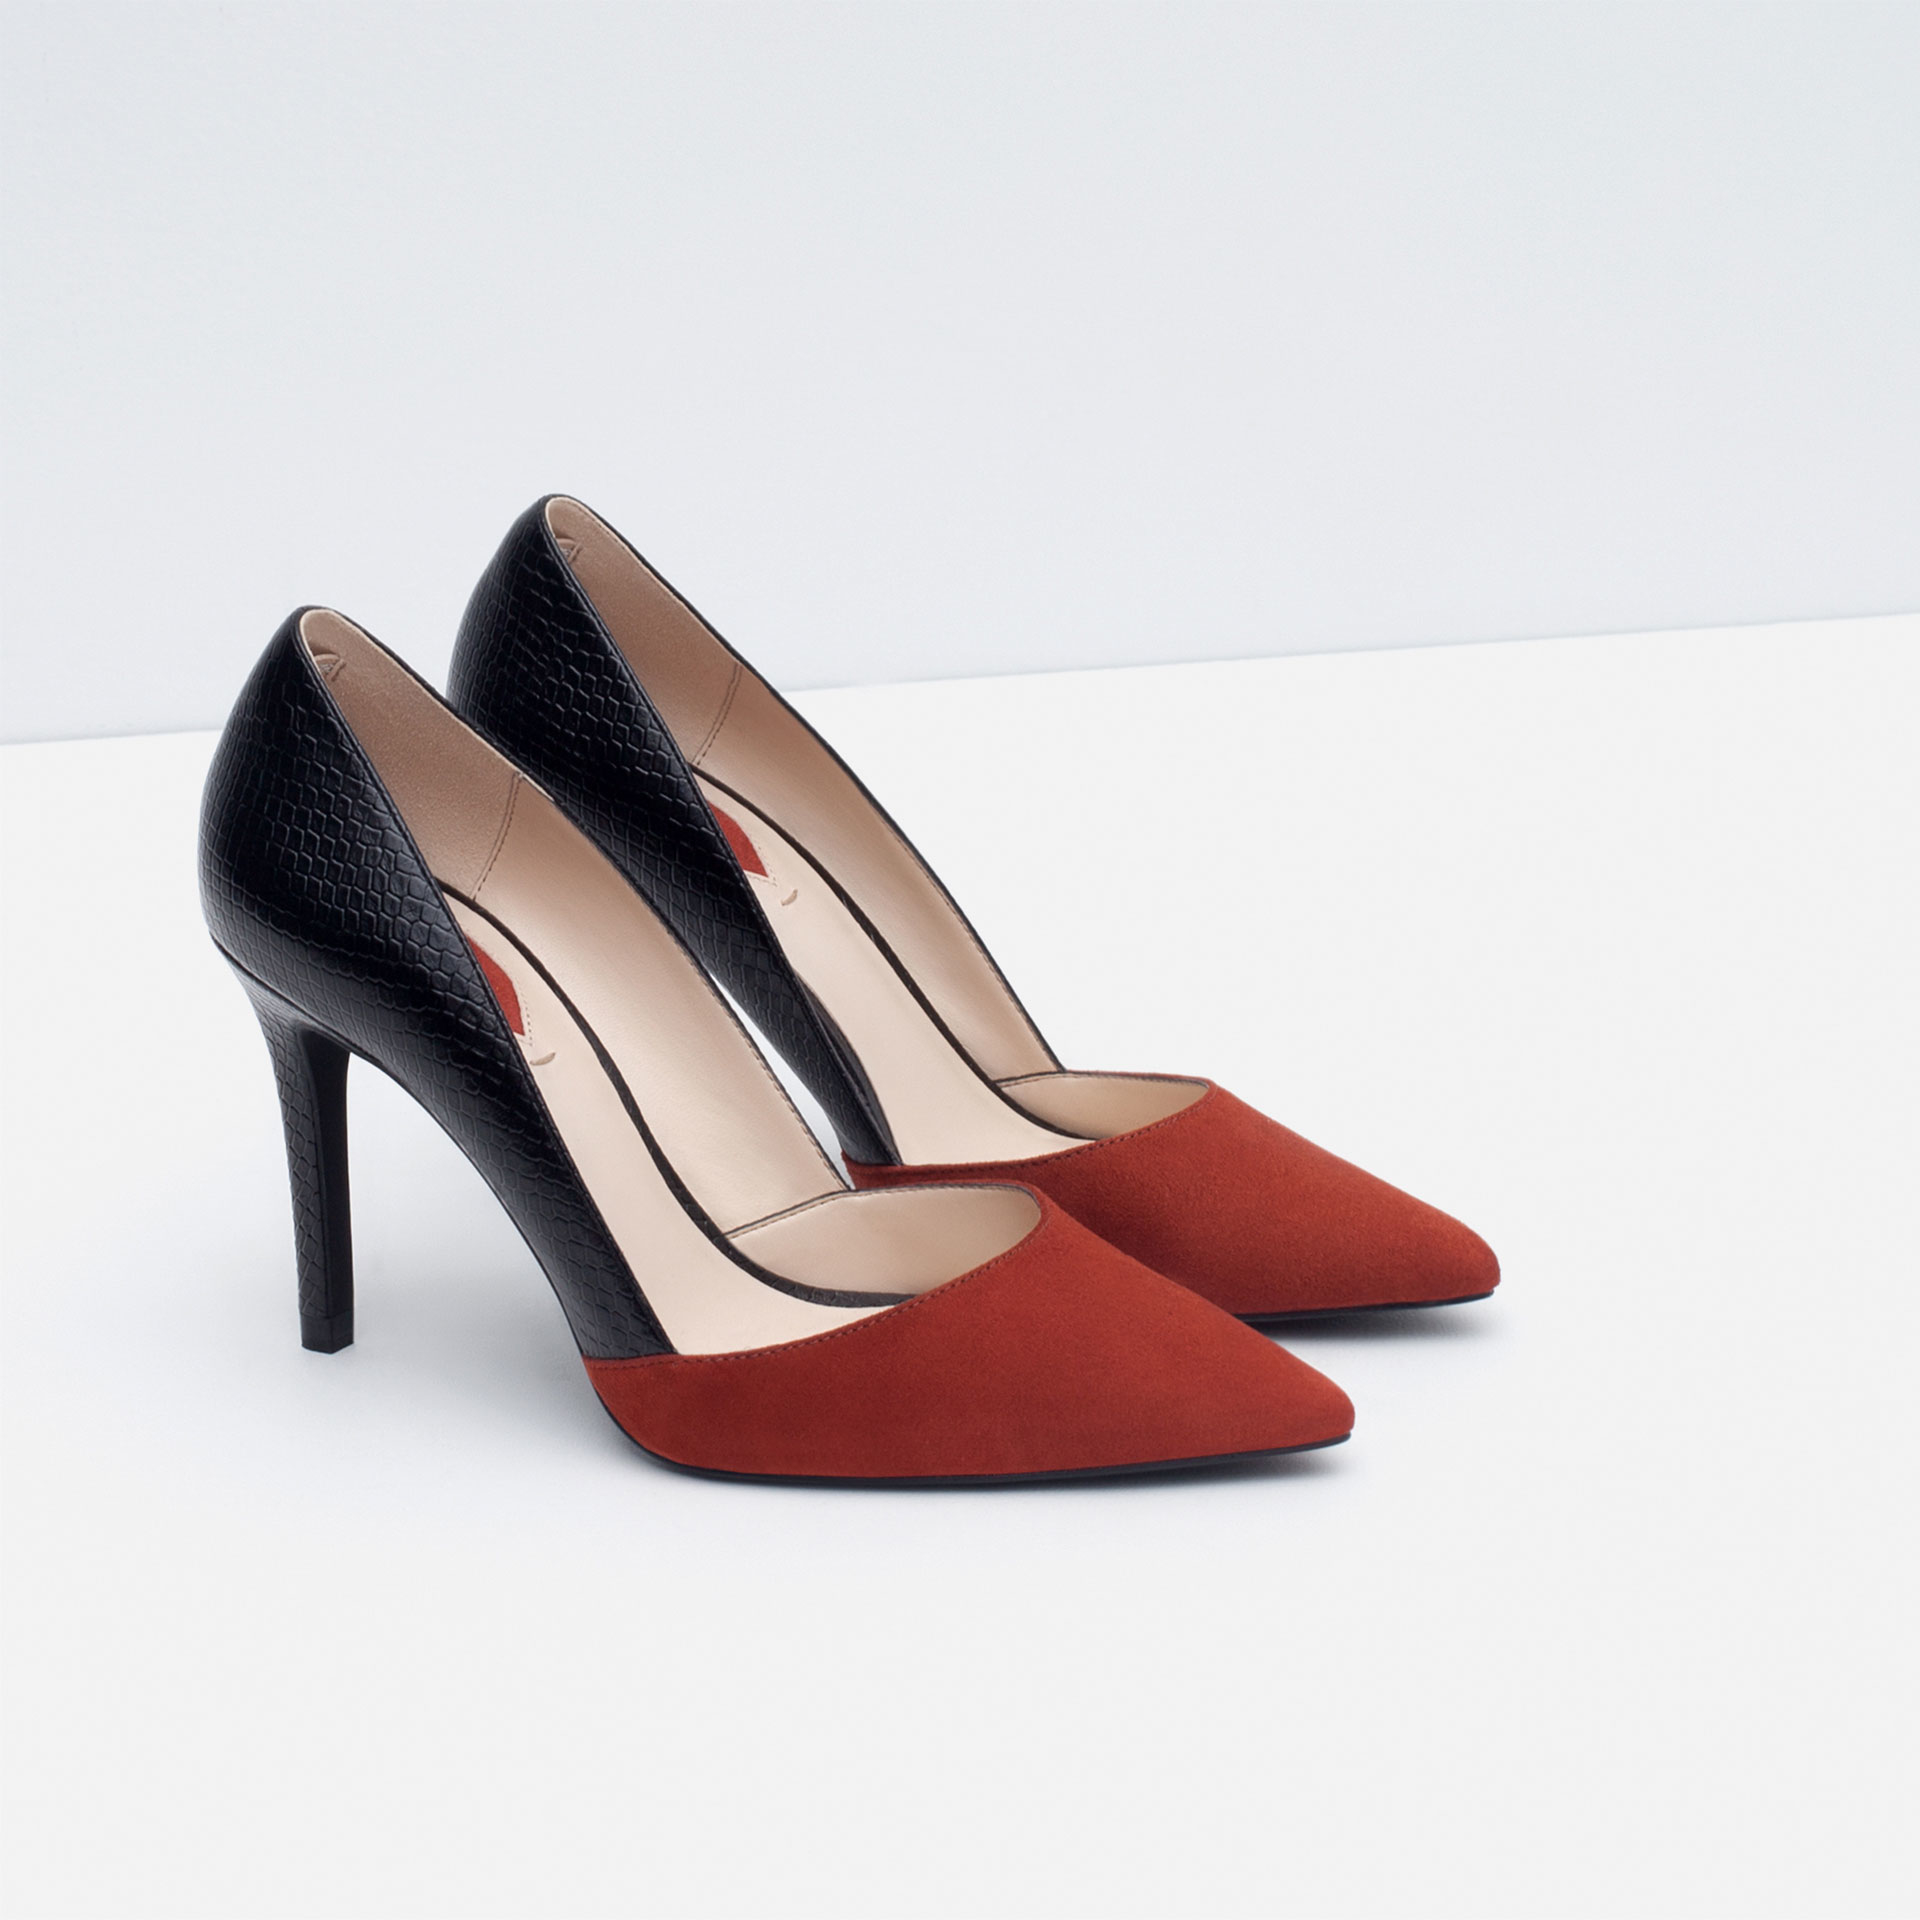 Zara Mid Heel Combined Court Shoes in Red (Multicolour) Lyst